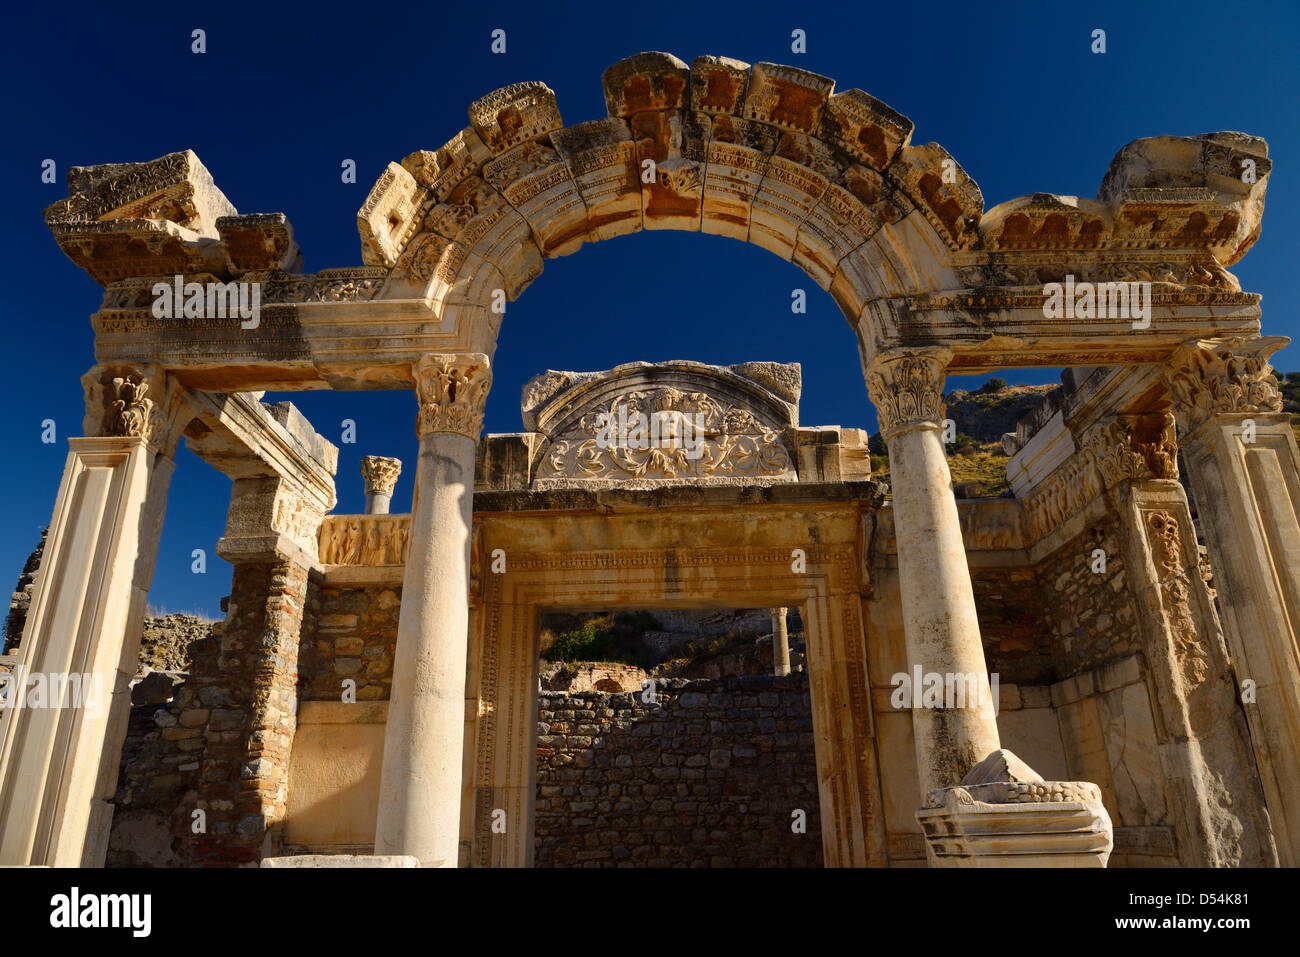 Ornate stone carving facade of the Temple of Hadrian with Tyche Goddess of the city of Ephesus Turkey with clear blue sky Stock Photo